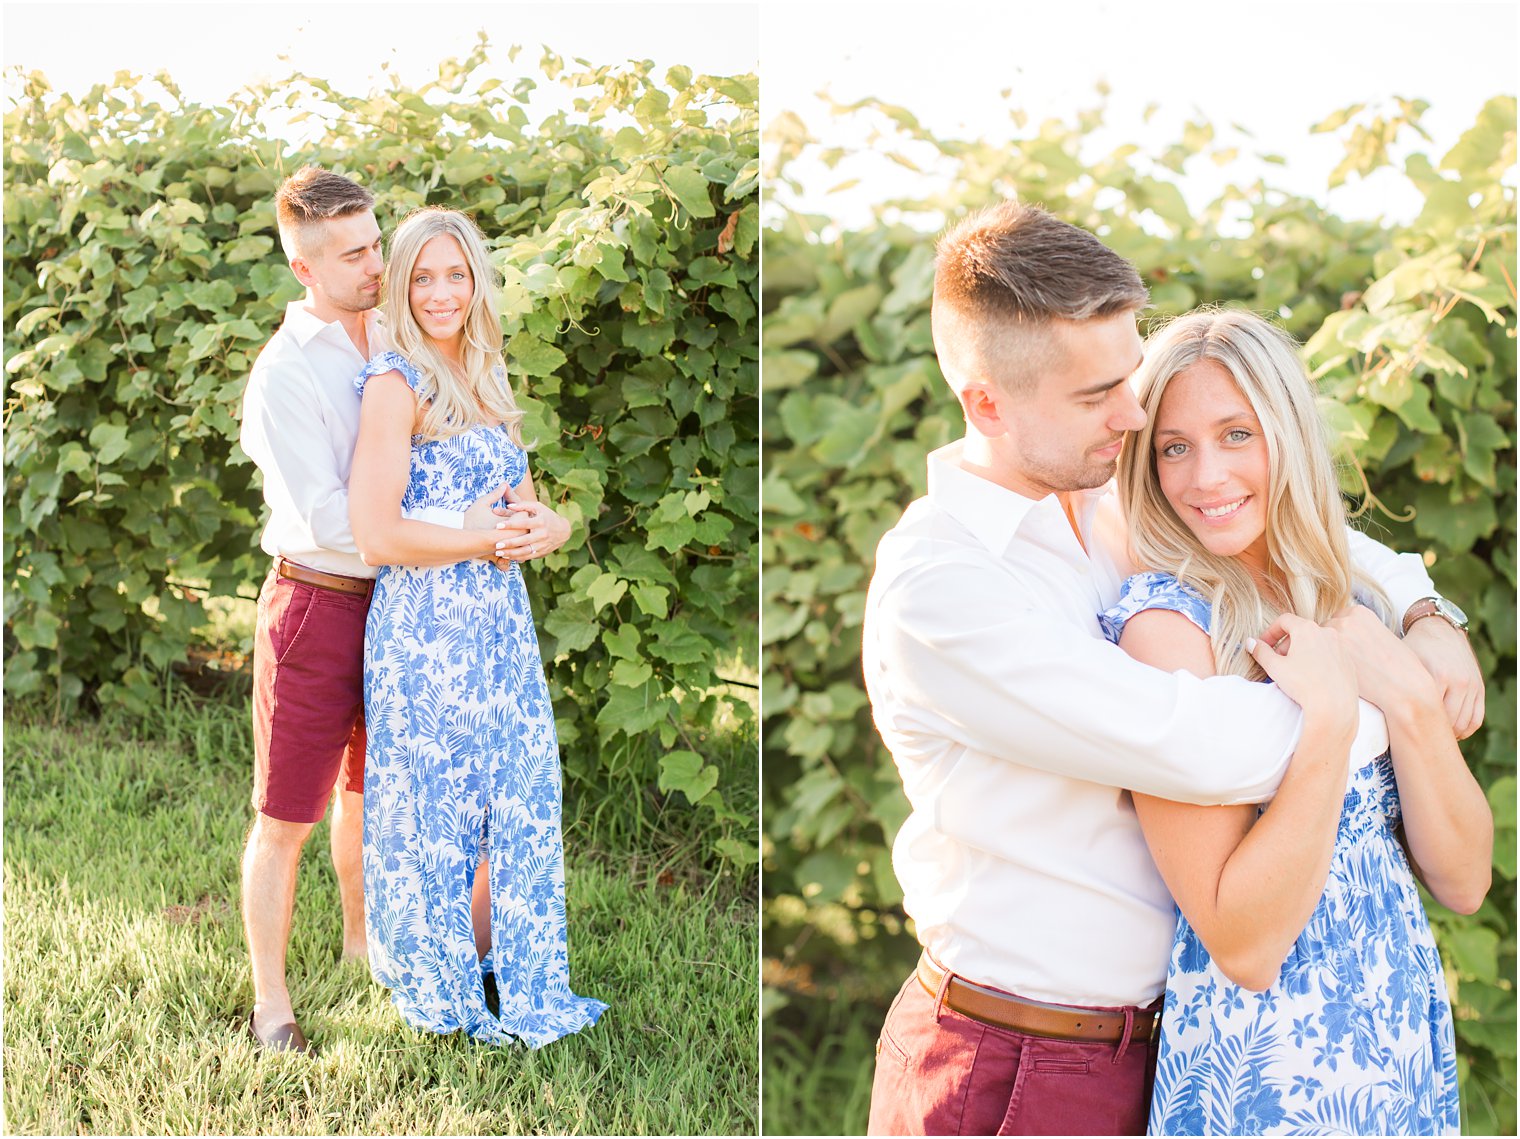 engagement session among vines at Laurita Winery photographed by Idalia Photography